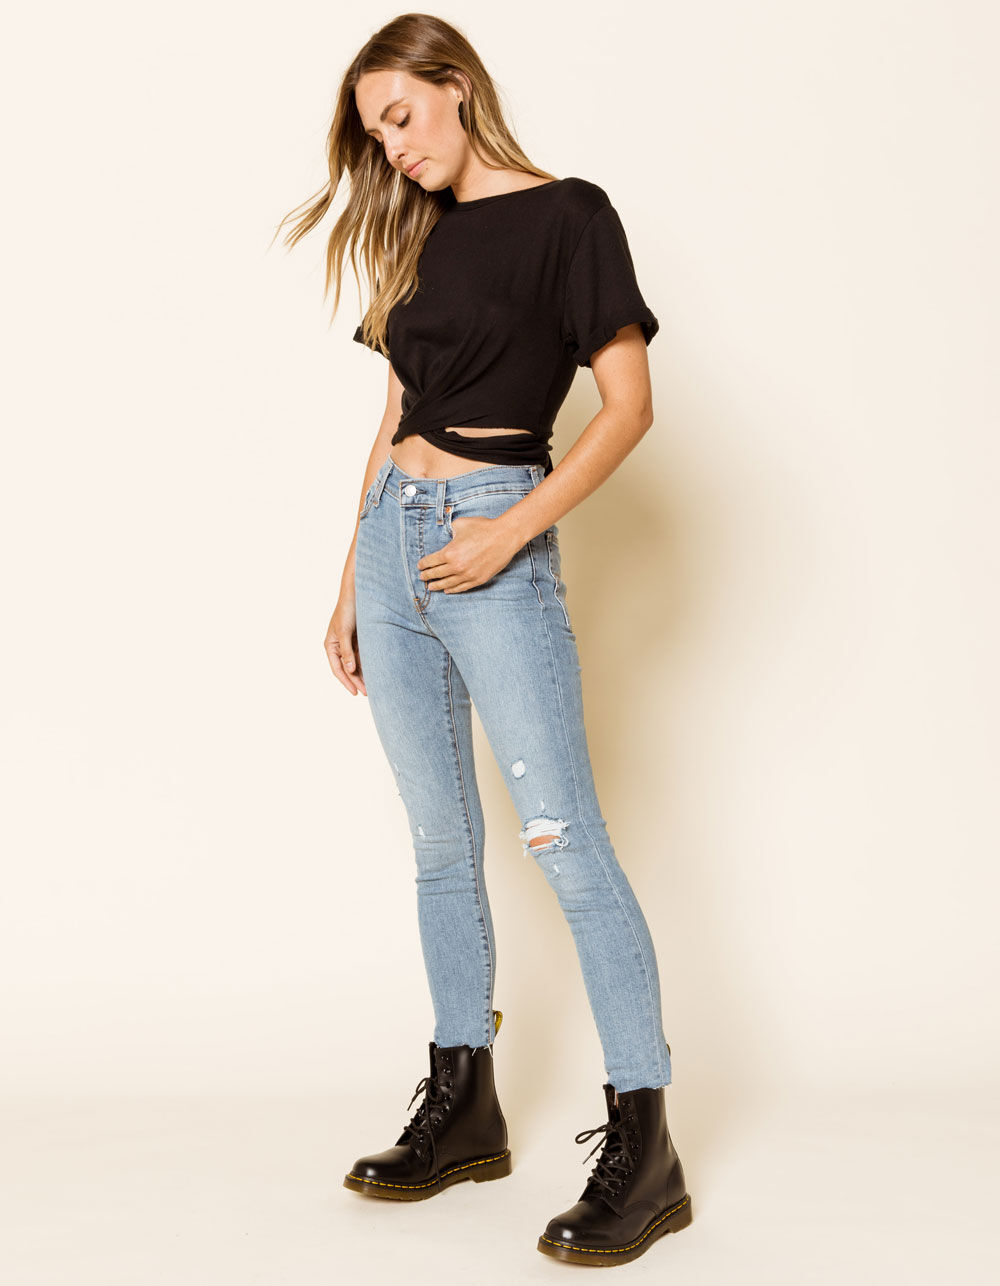 WEST OF MELROSE Open To Anything Black Womens Tie Back Tee - BLACK | Tillys